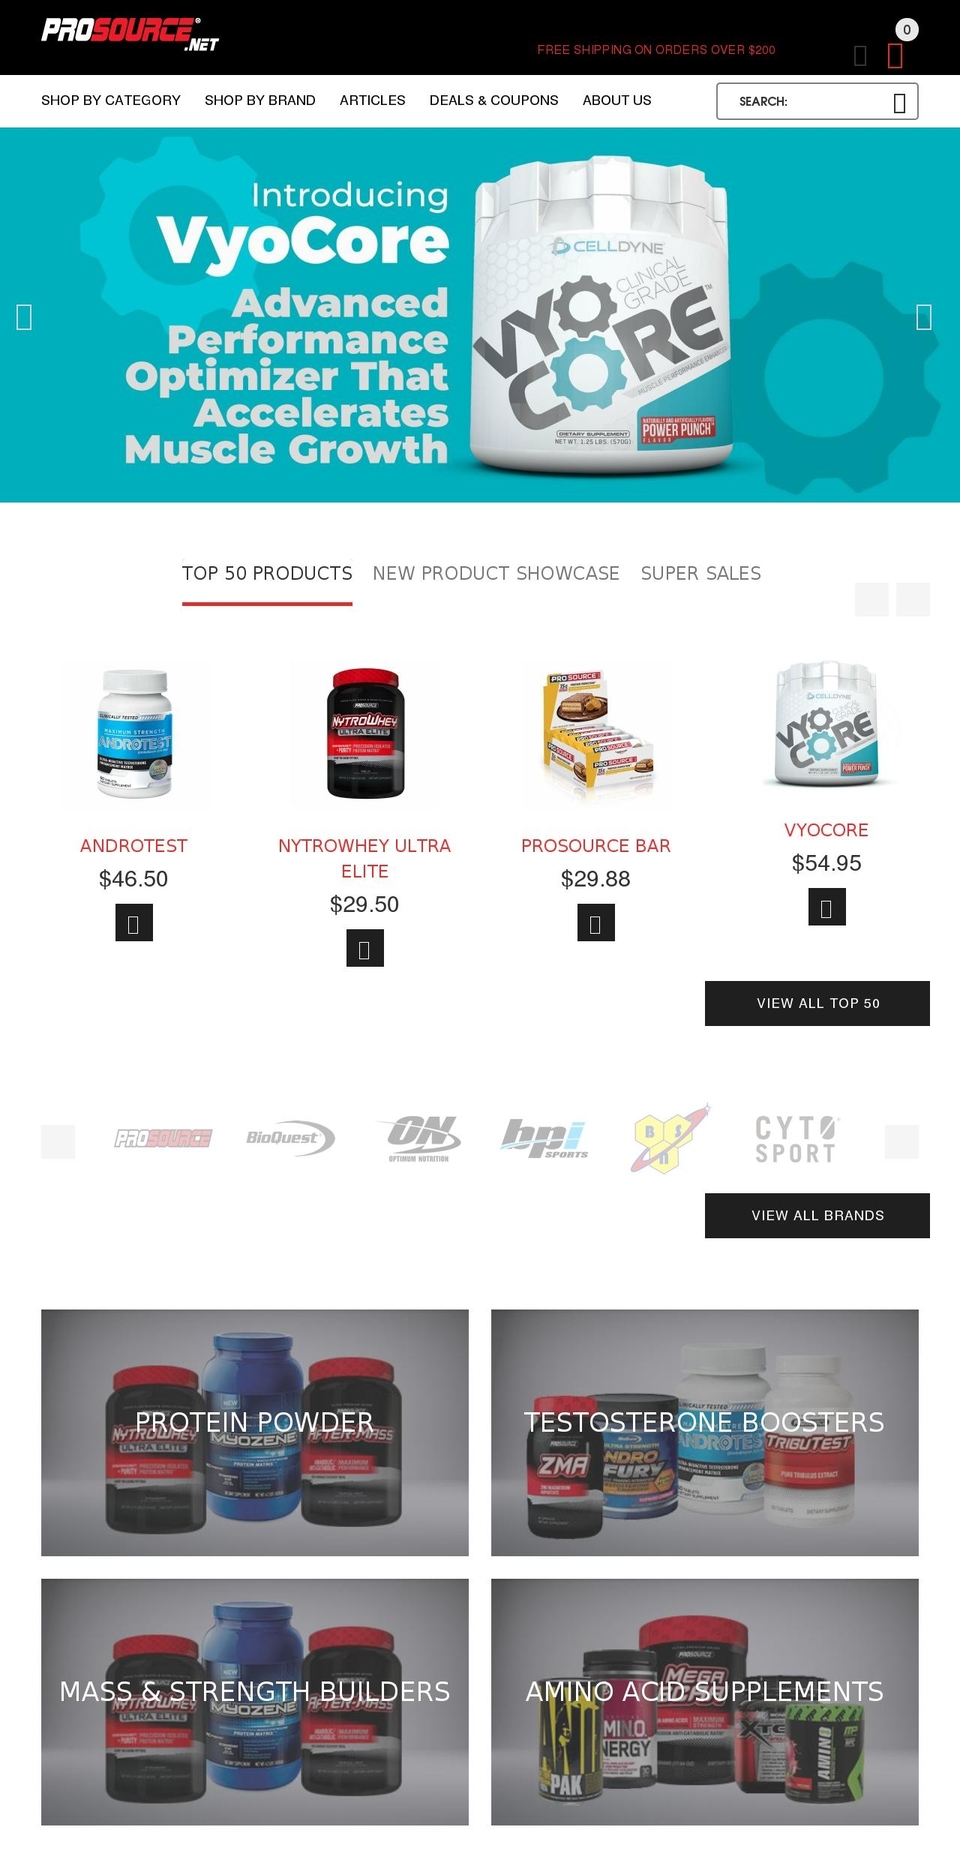 install-me-yourstore-v2-1-7 Shopify theme site example nytrogainer.com